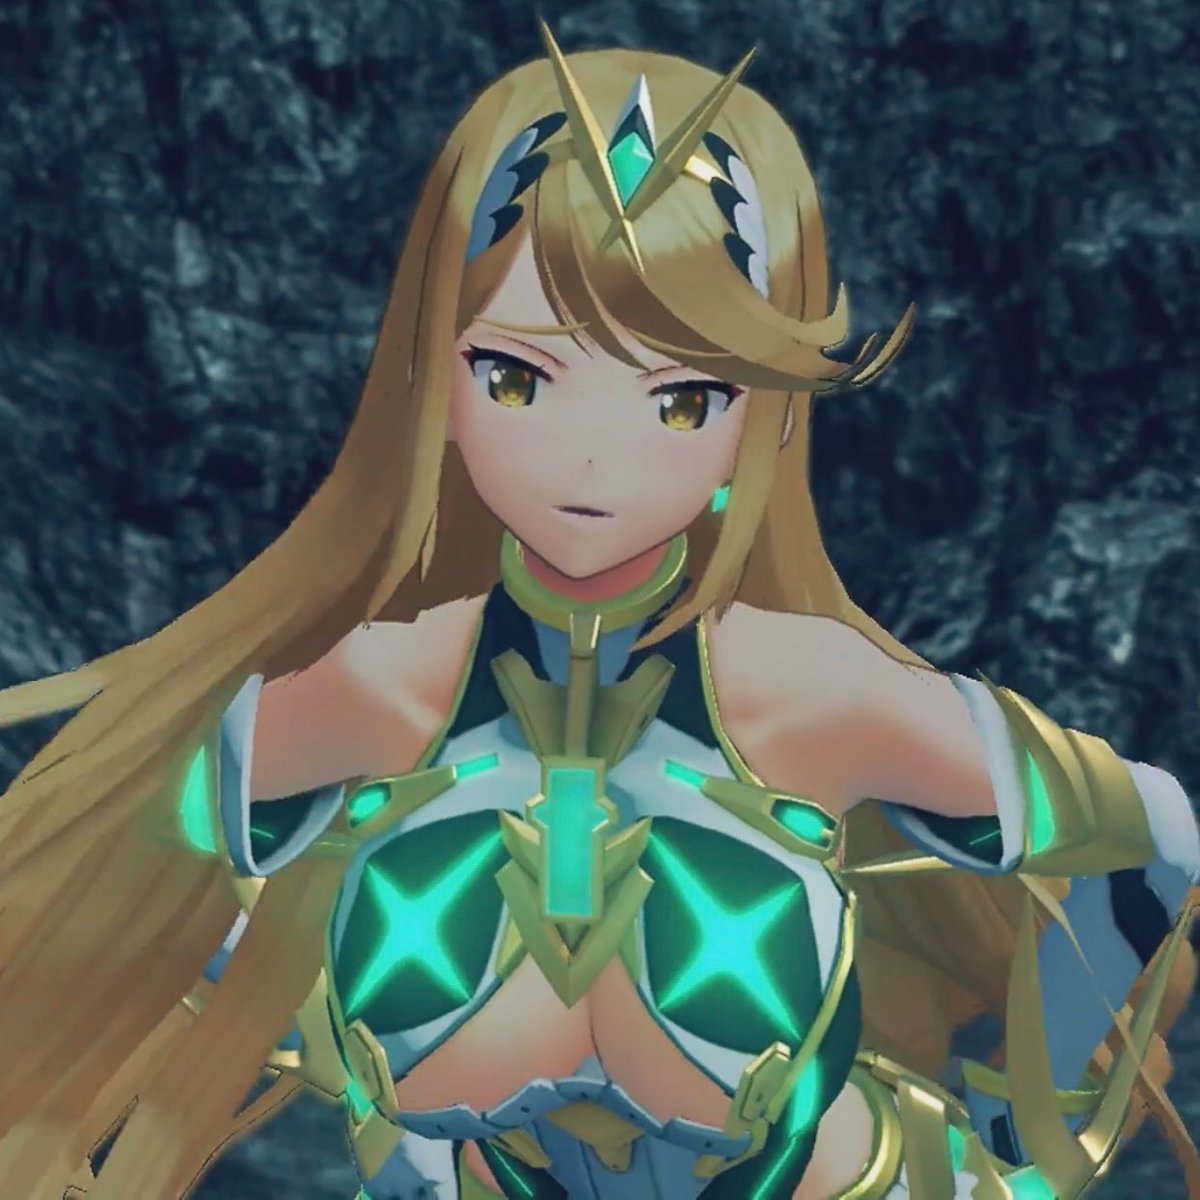 Just popping in to say that Mythra could kick my ass and I’d thank her for ...